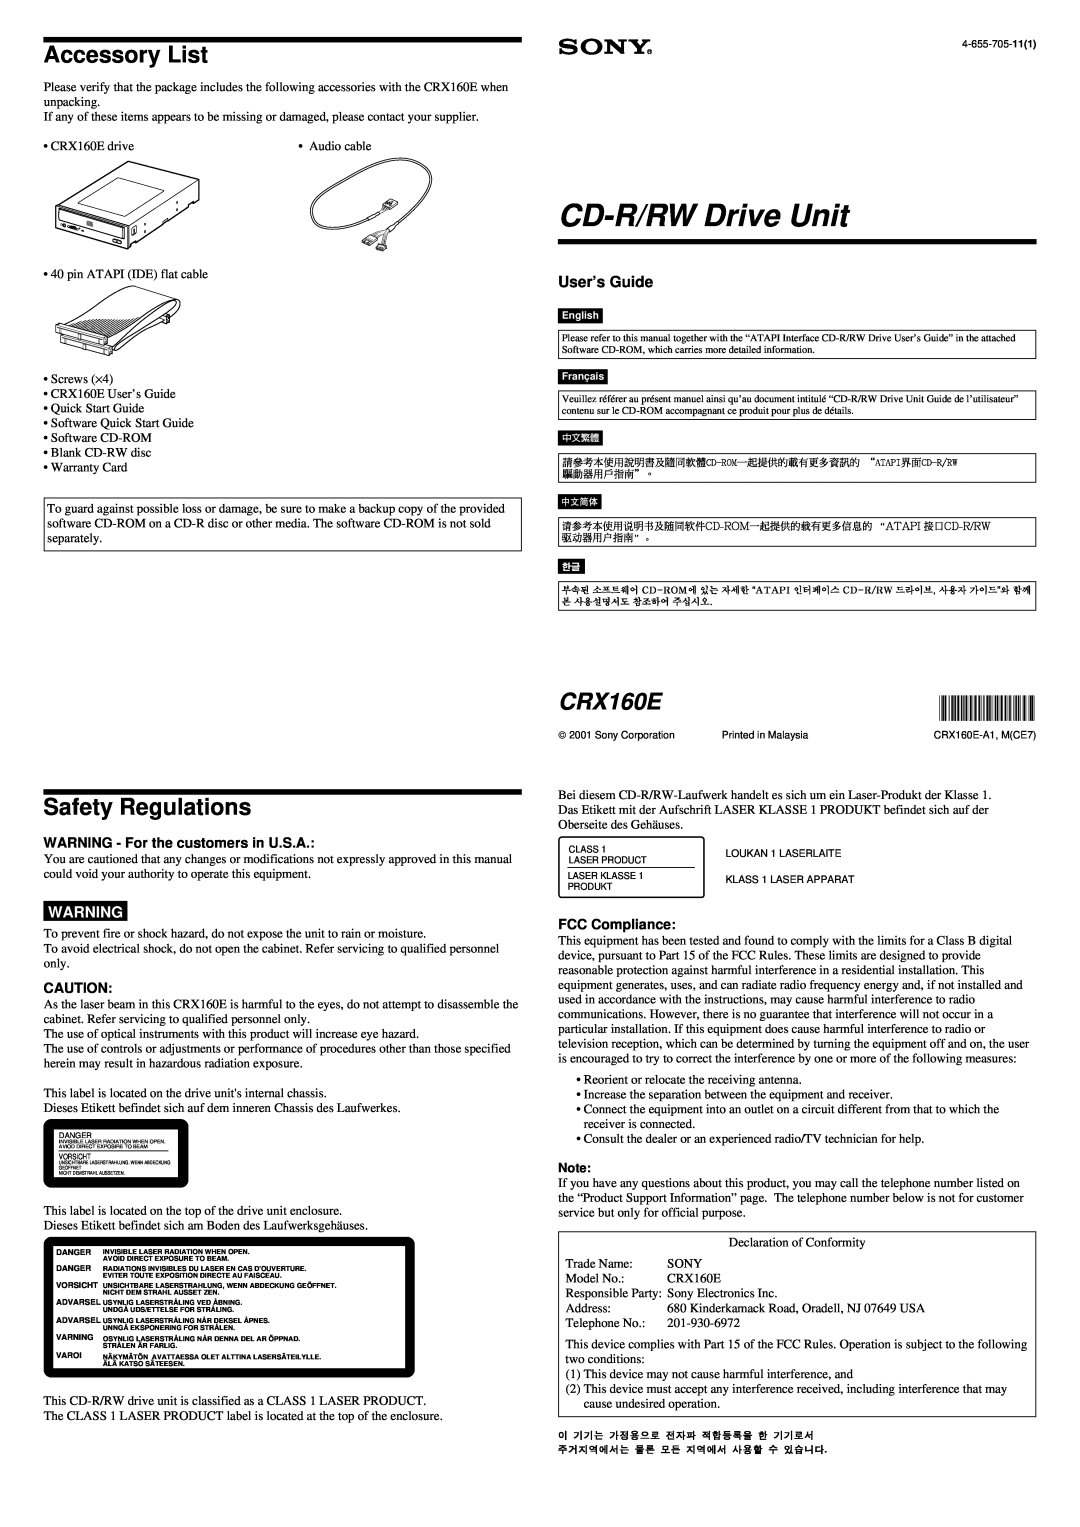 Sony CRX160E quick start Accessory List, Safety Regulations, User’s Guide, WARNING - For the customers in U.S.A 